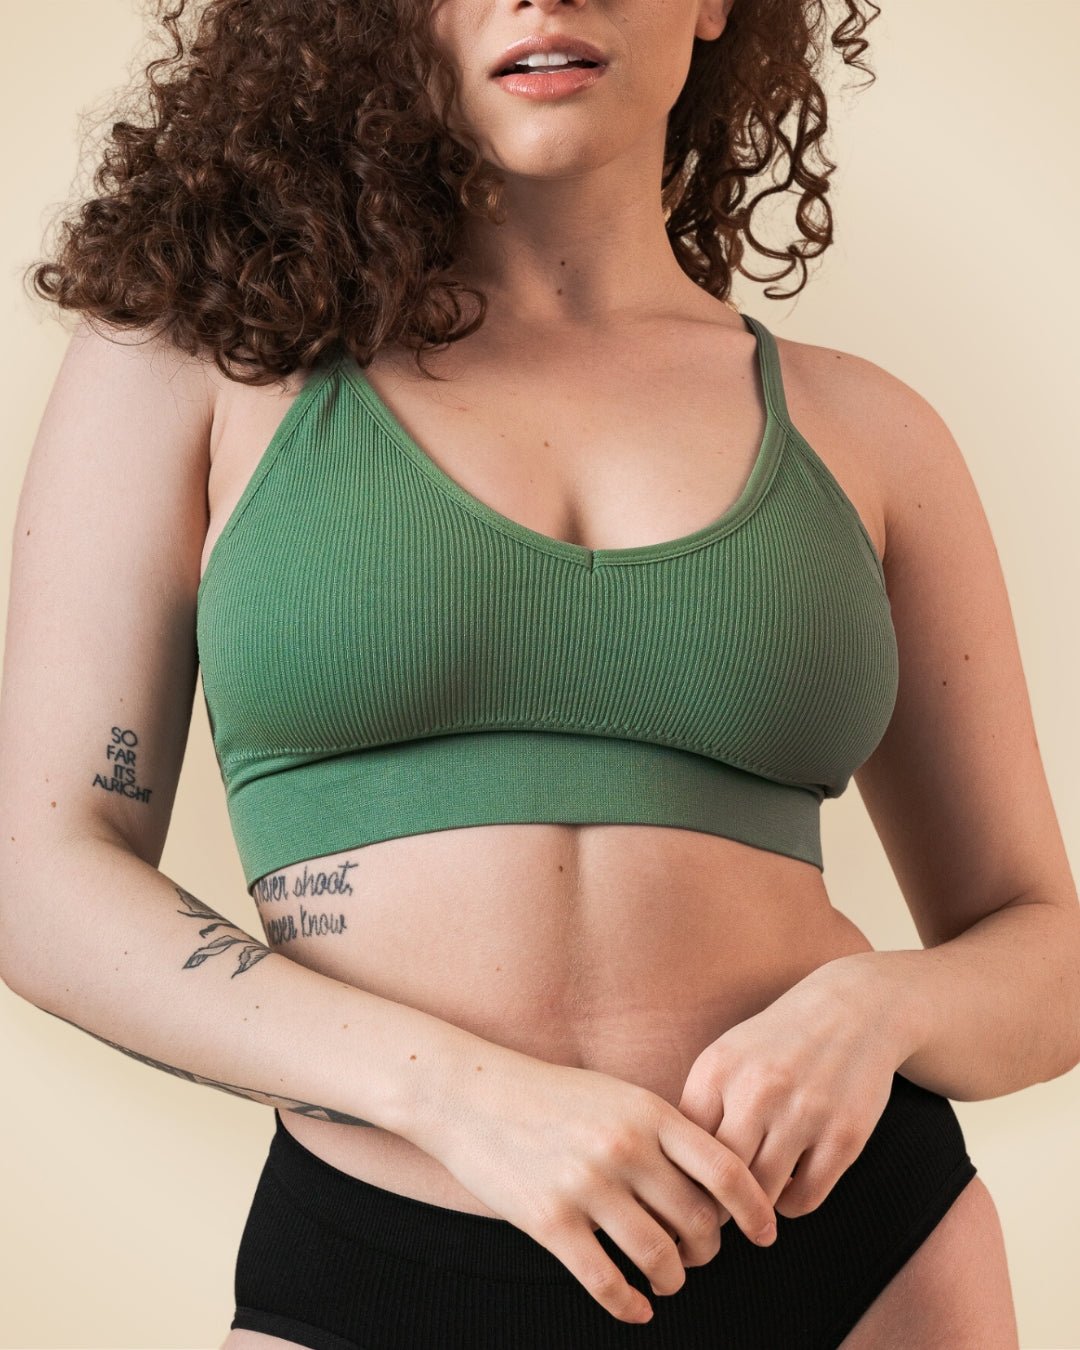 Forlest - You need one A amazing fit seamless bra! #summerbra